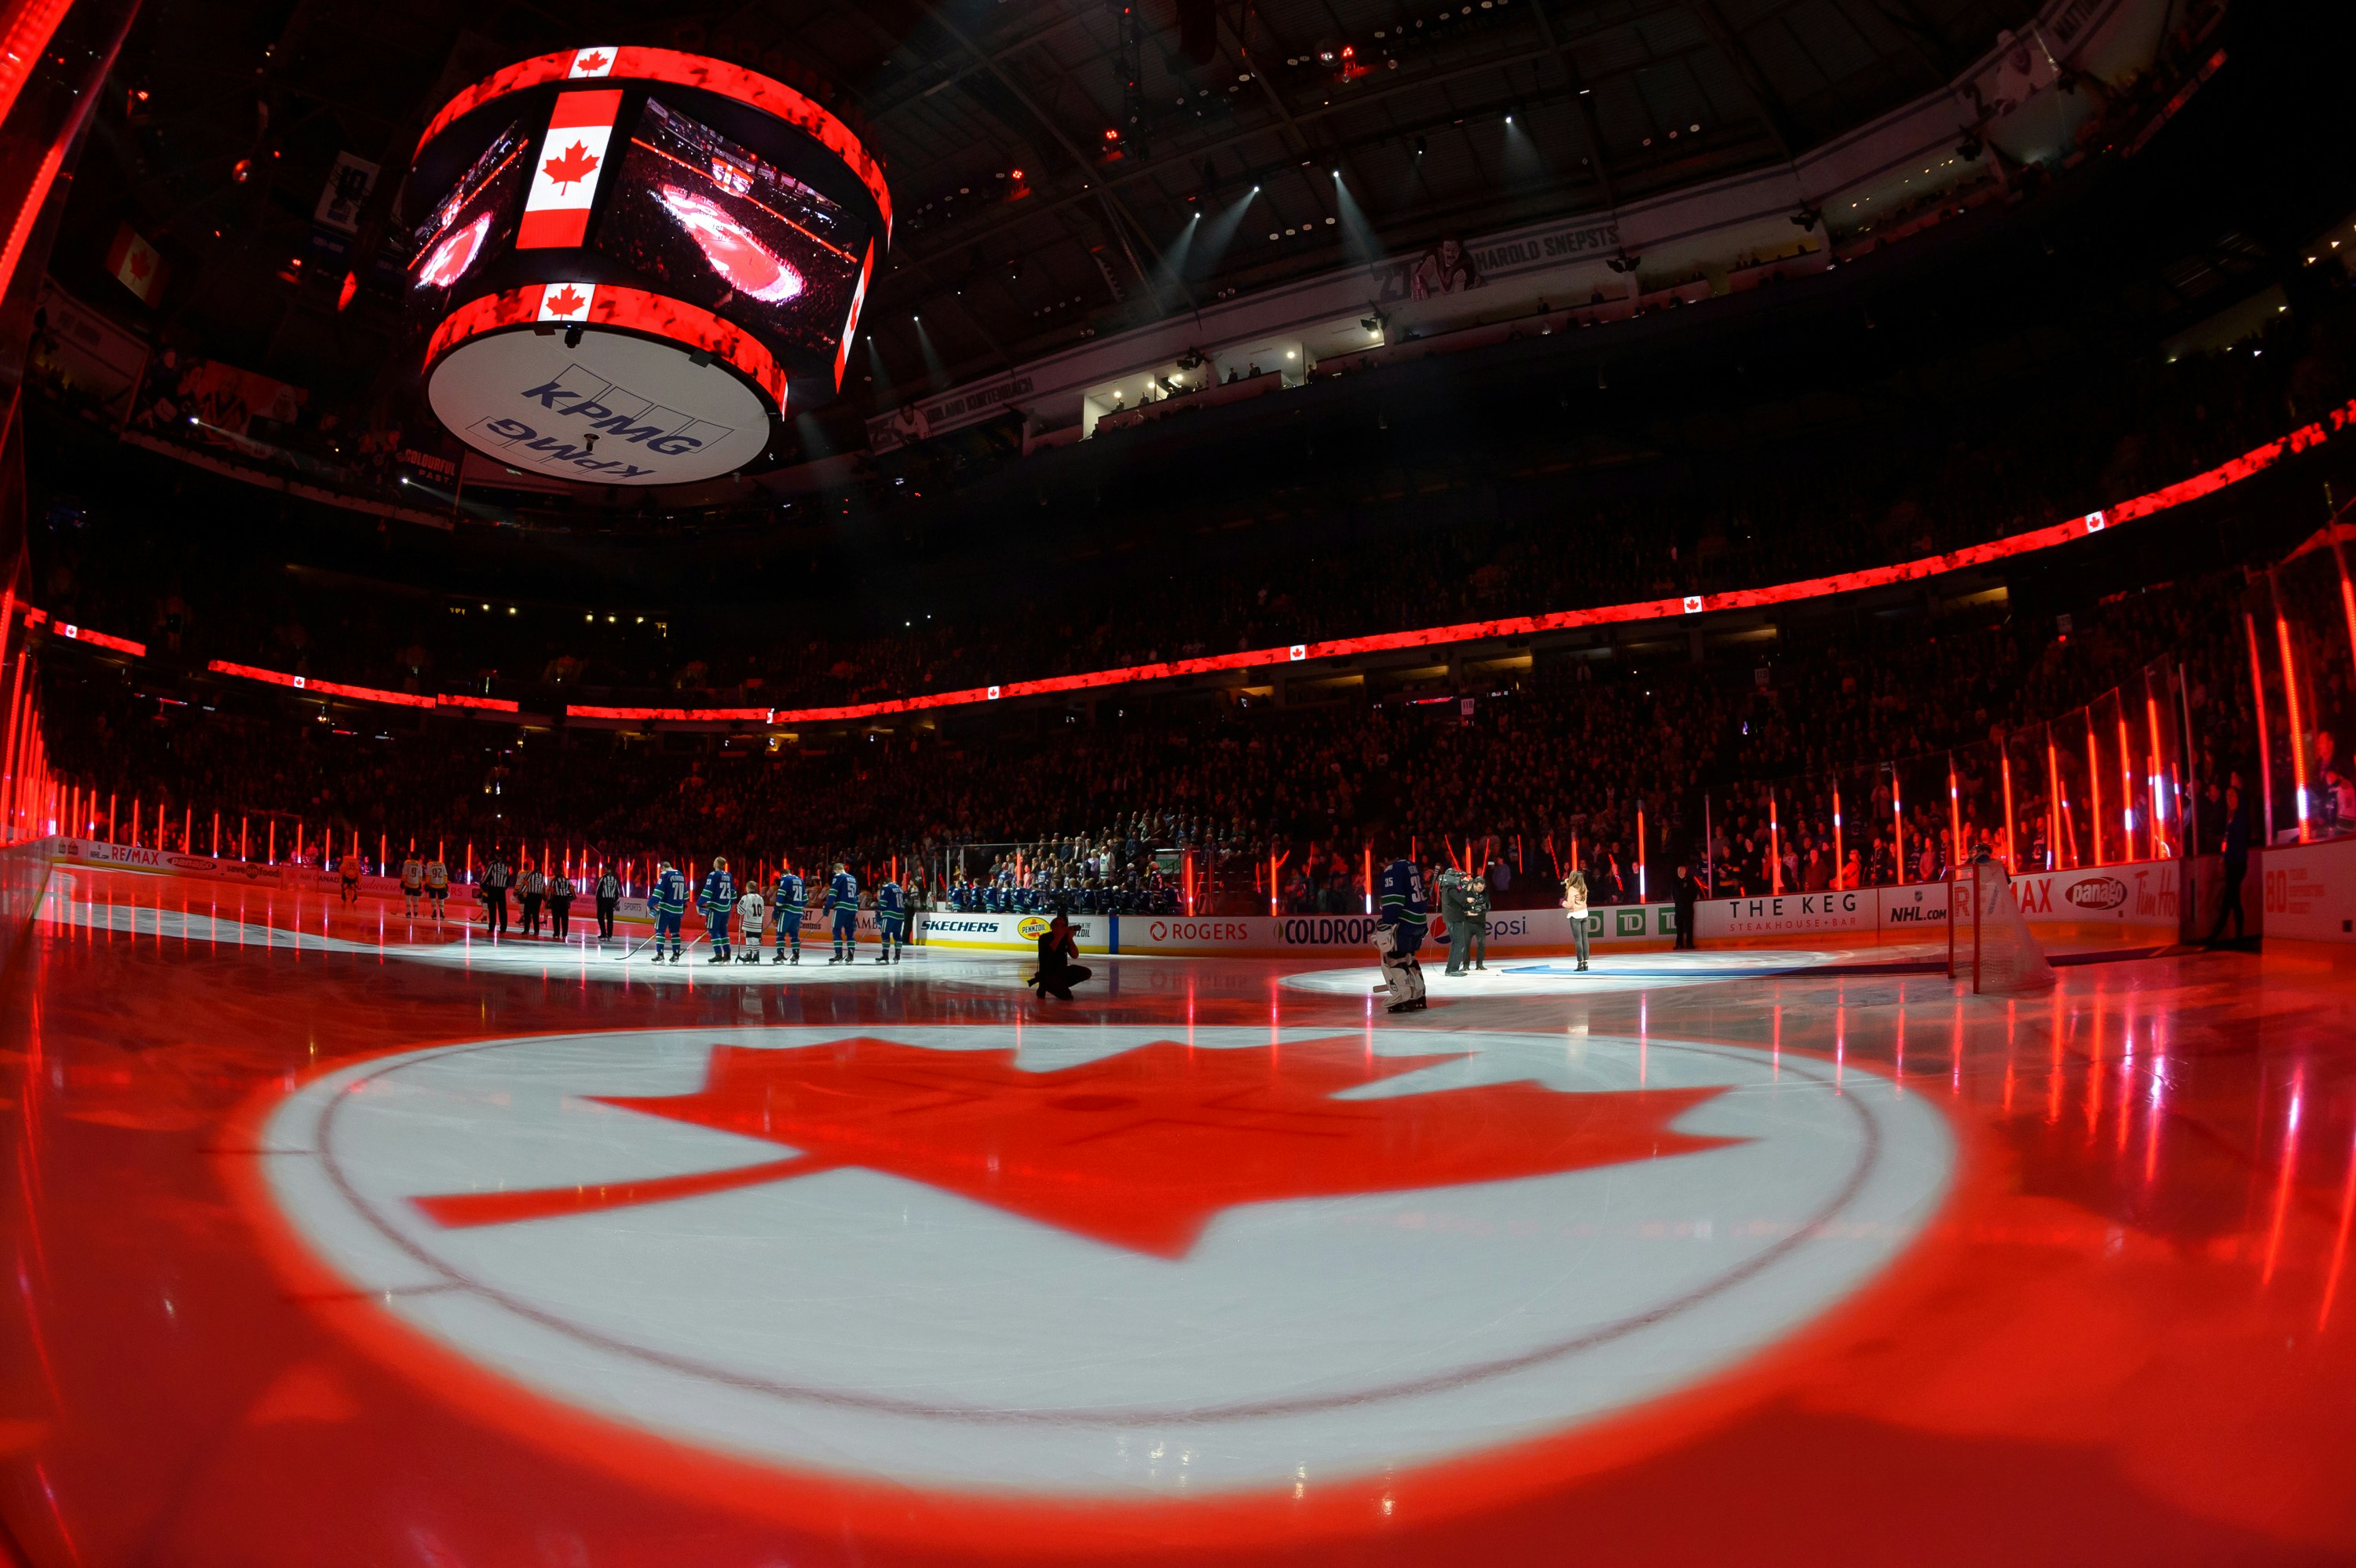 A light show depicting the Canadian flag lights up Rogers Arena in Vancouver before an ice hockey match